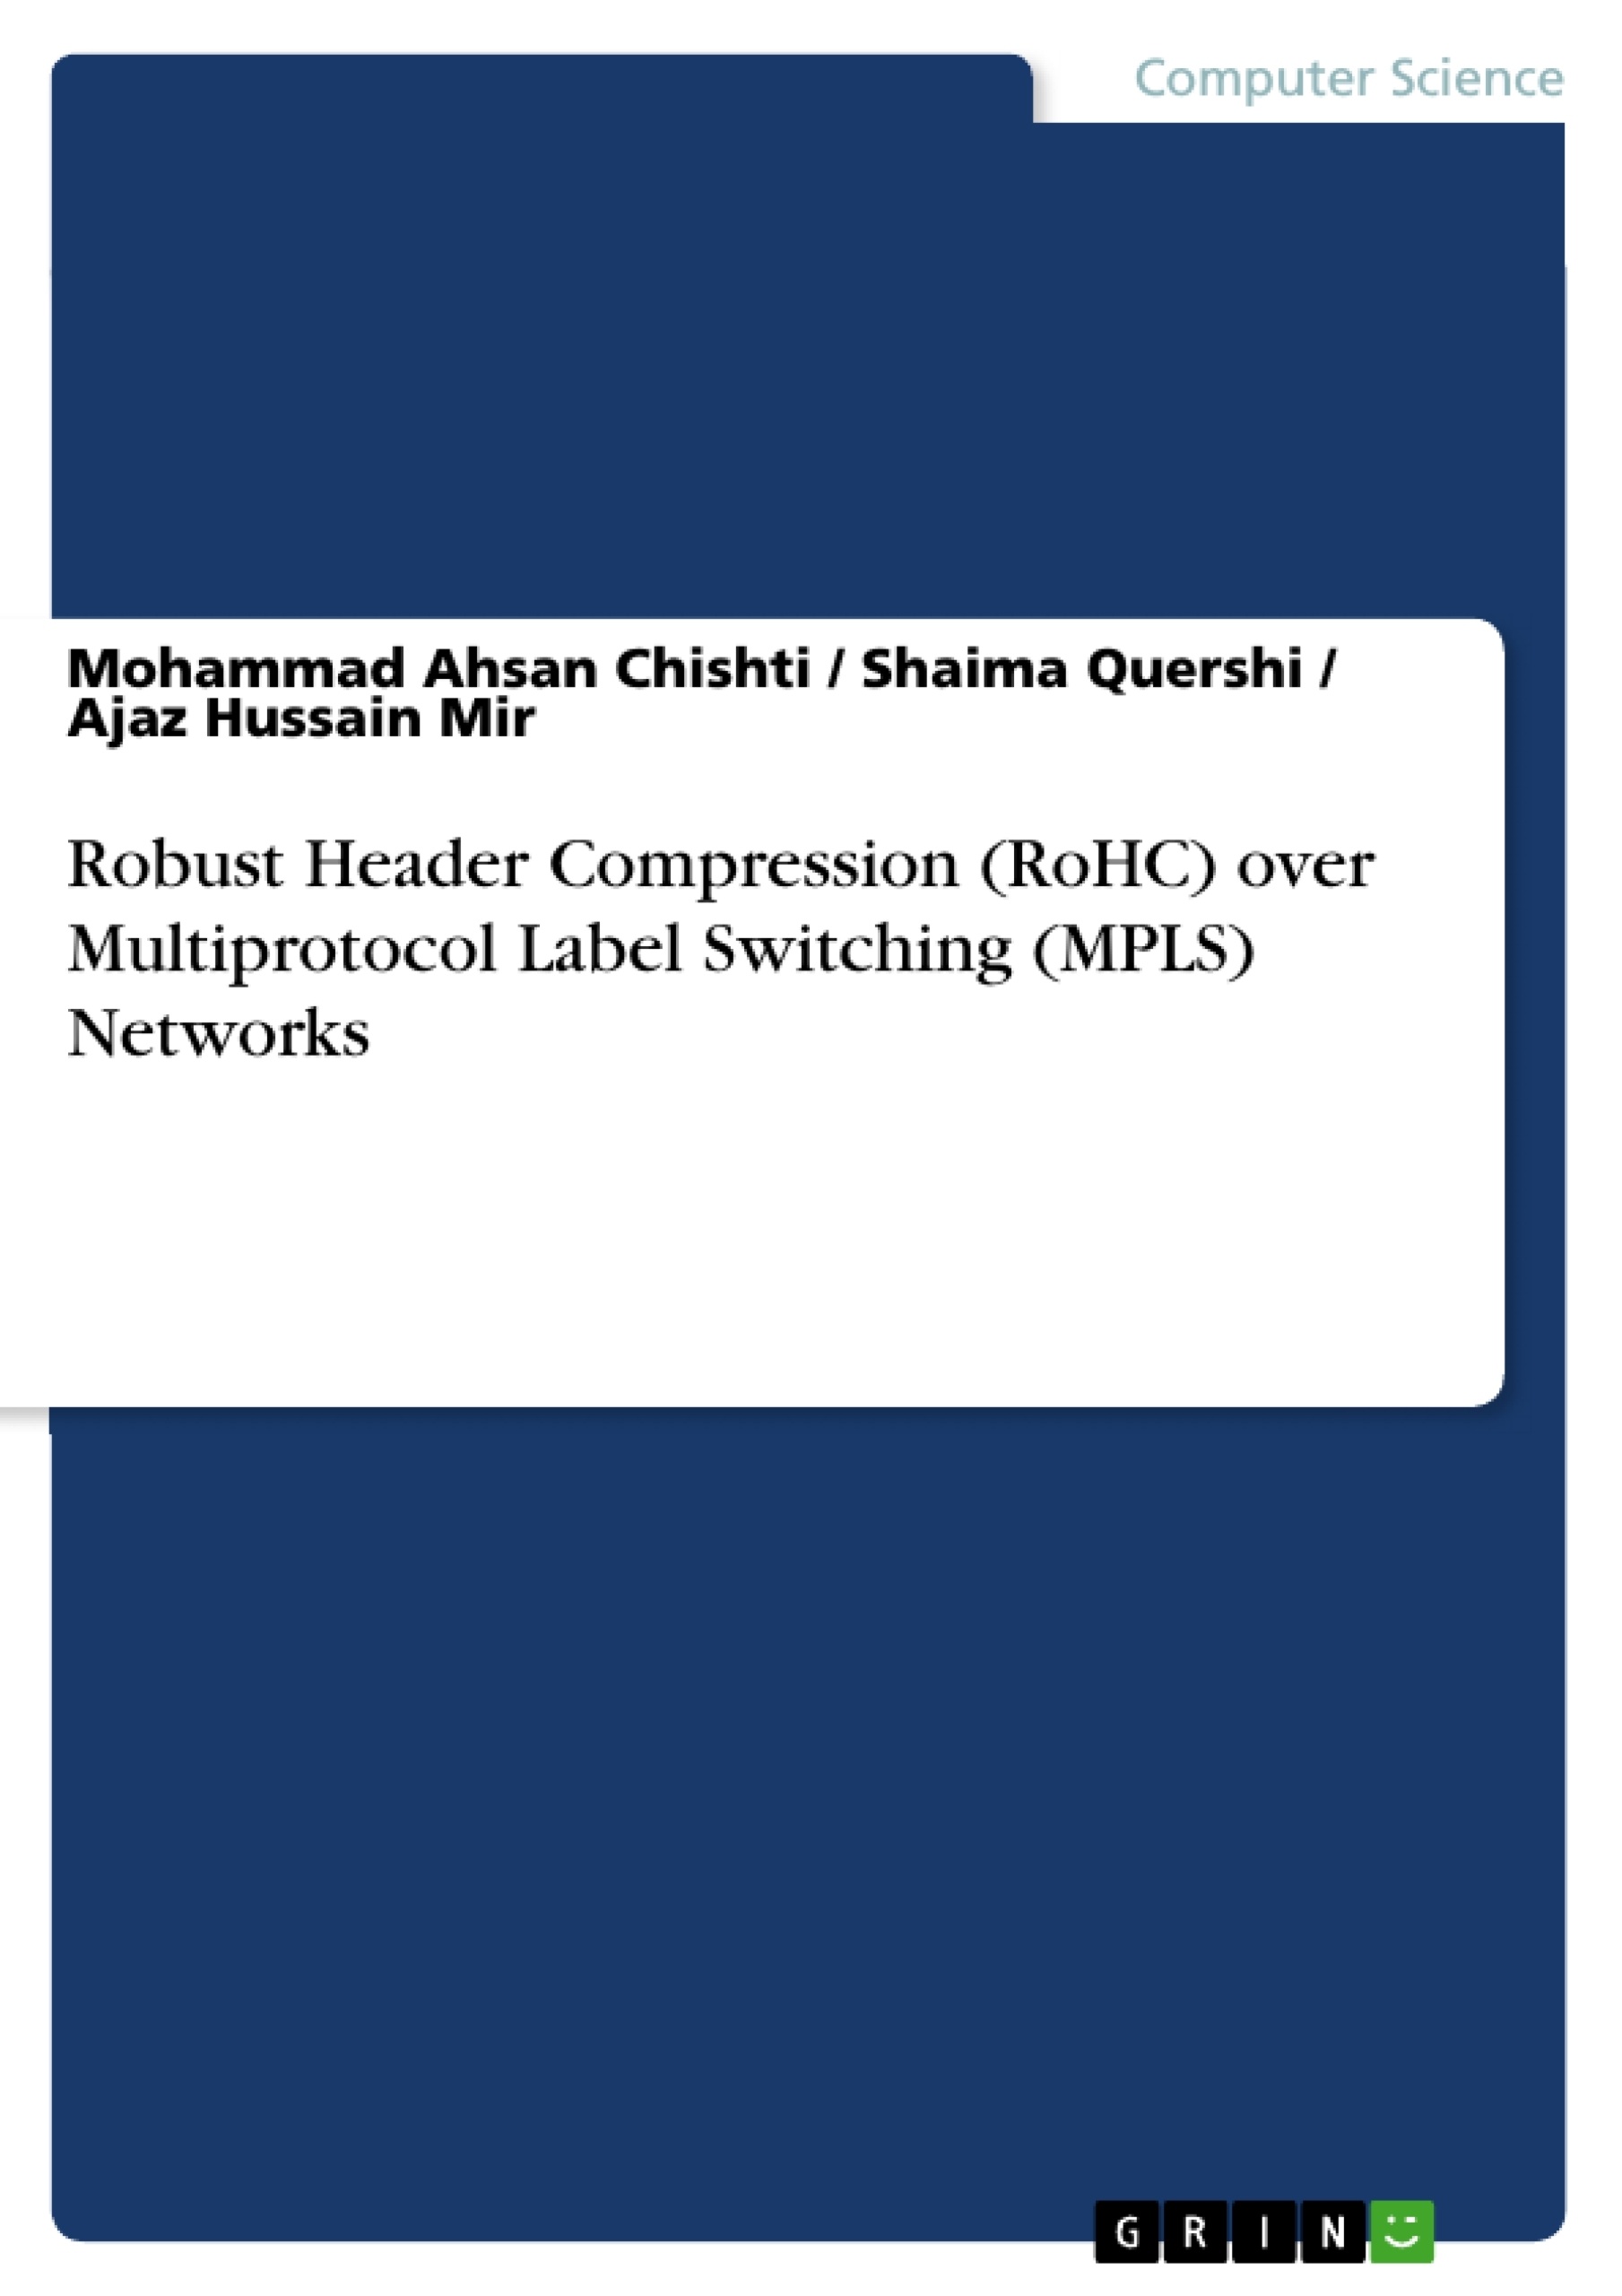 Titel: Robust Header Compression (RoHC) over Multiprotocol Label Switching (MPLS) Networks